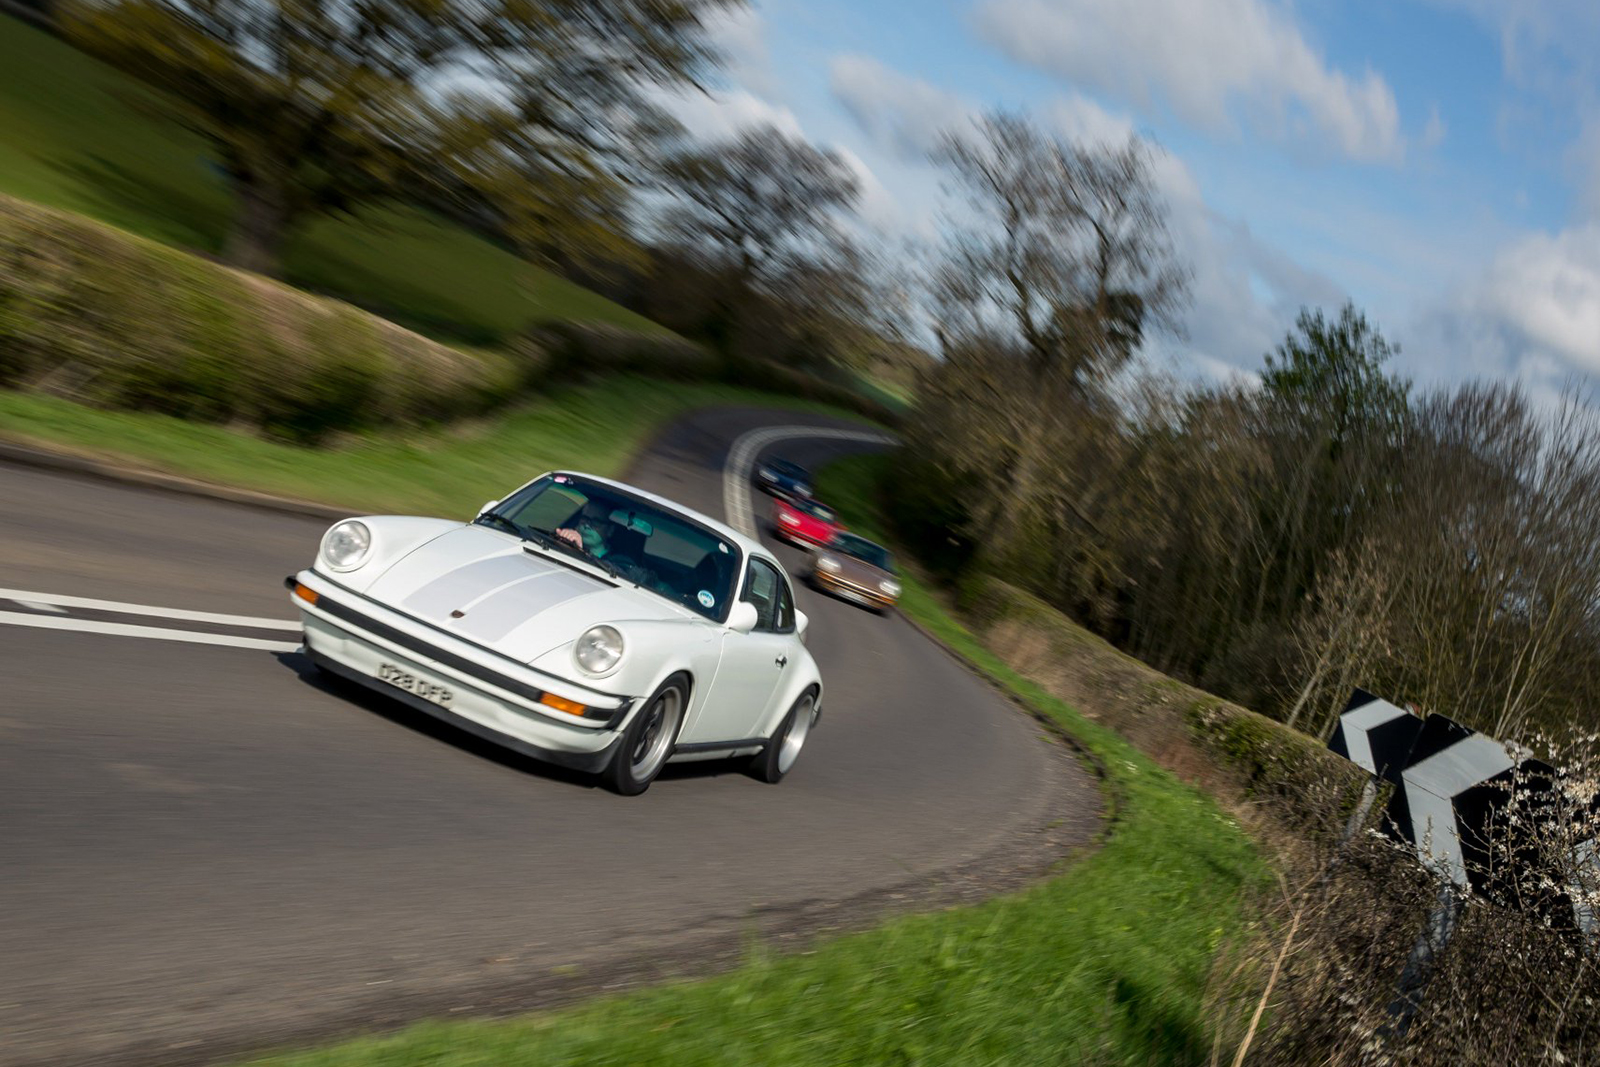 Hagerty Drive It Day comes to Tuthill Porsche